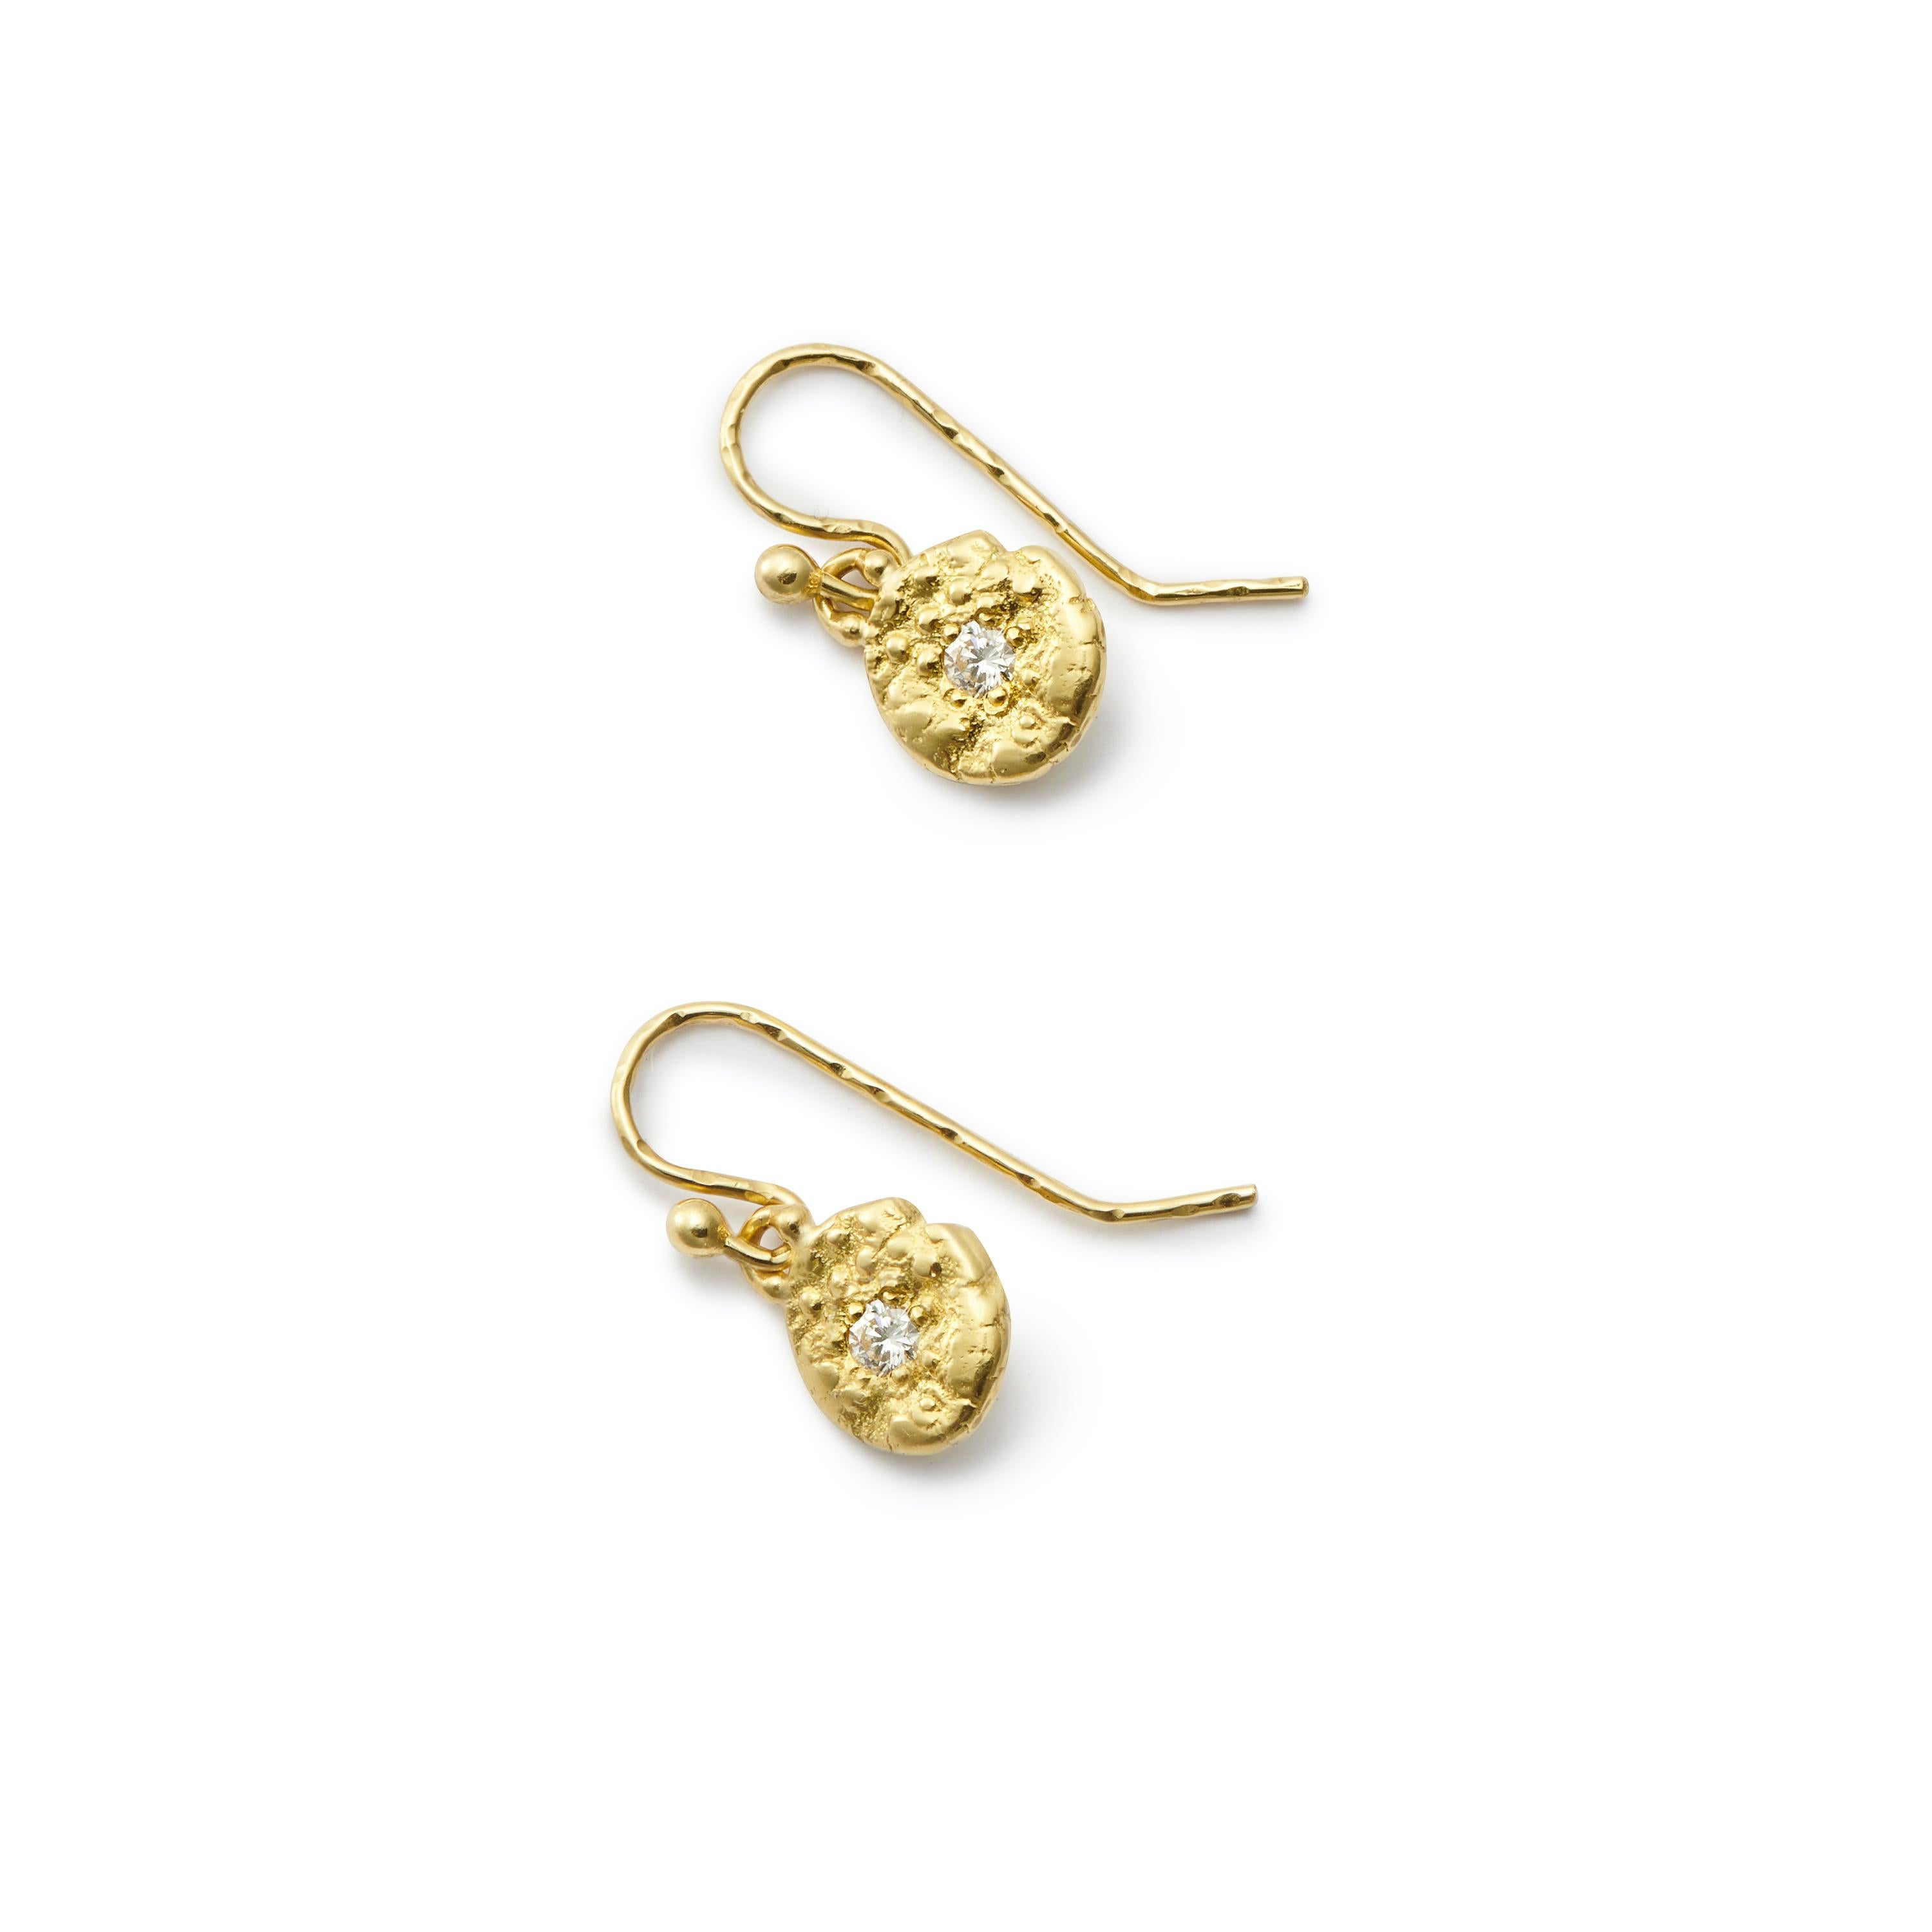 Our everyday earring, these “Seaquin